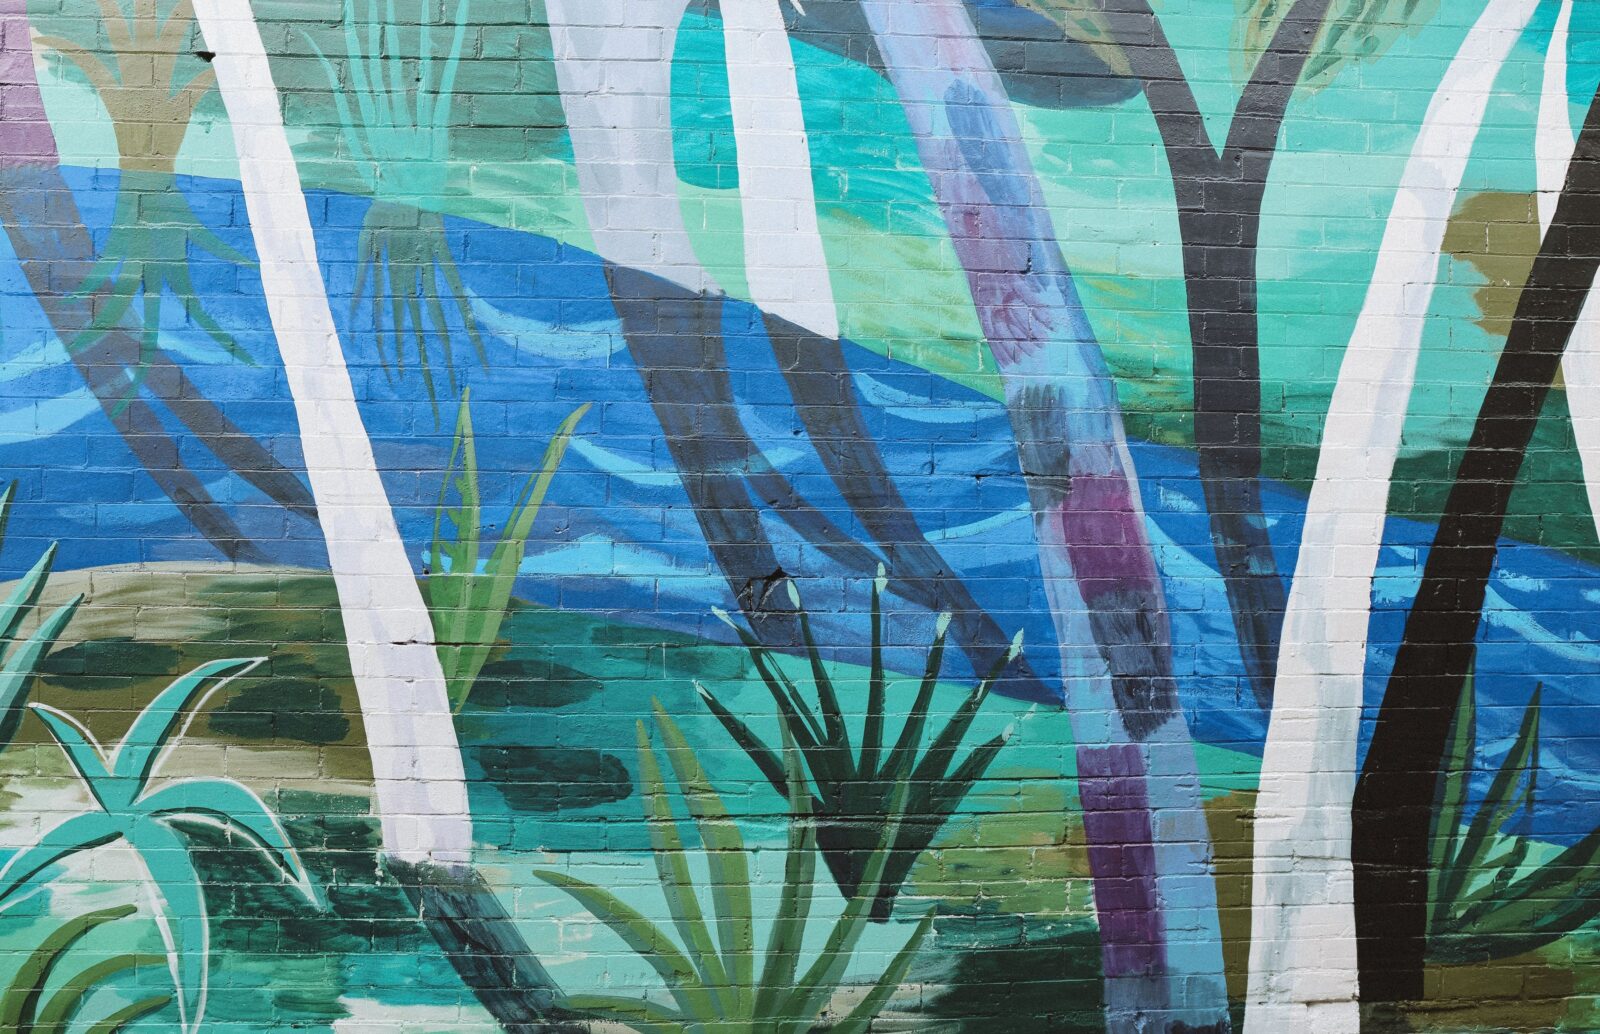 Visit Macleay Valley Coast Art Trail Macleay River Mural by Ellie Hannon